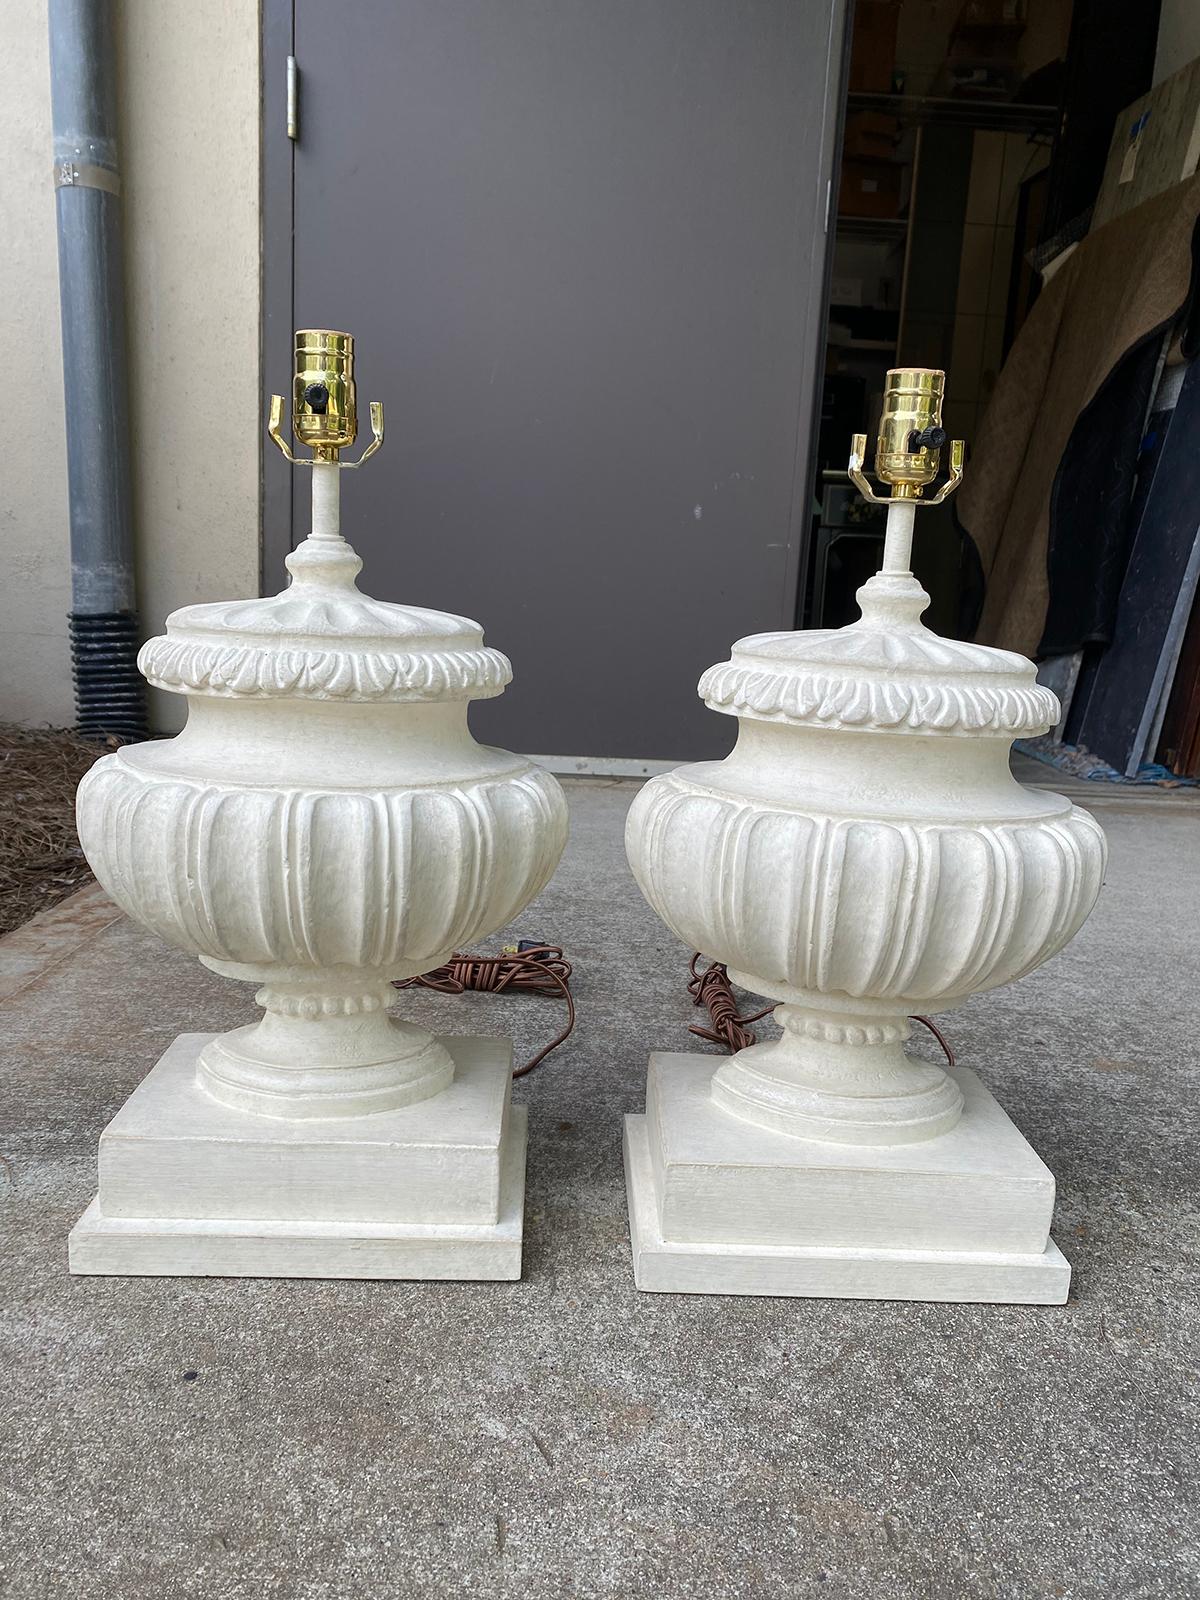 Pair of 20th century Borghese style urn lamps with custom hand painted finish
New wiring.